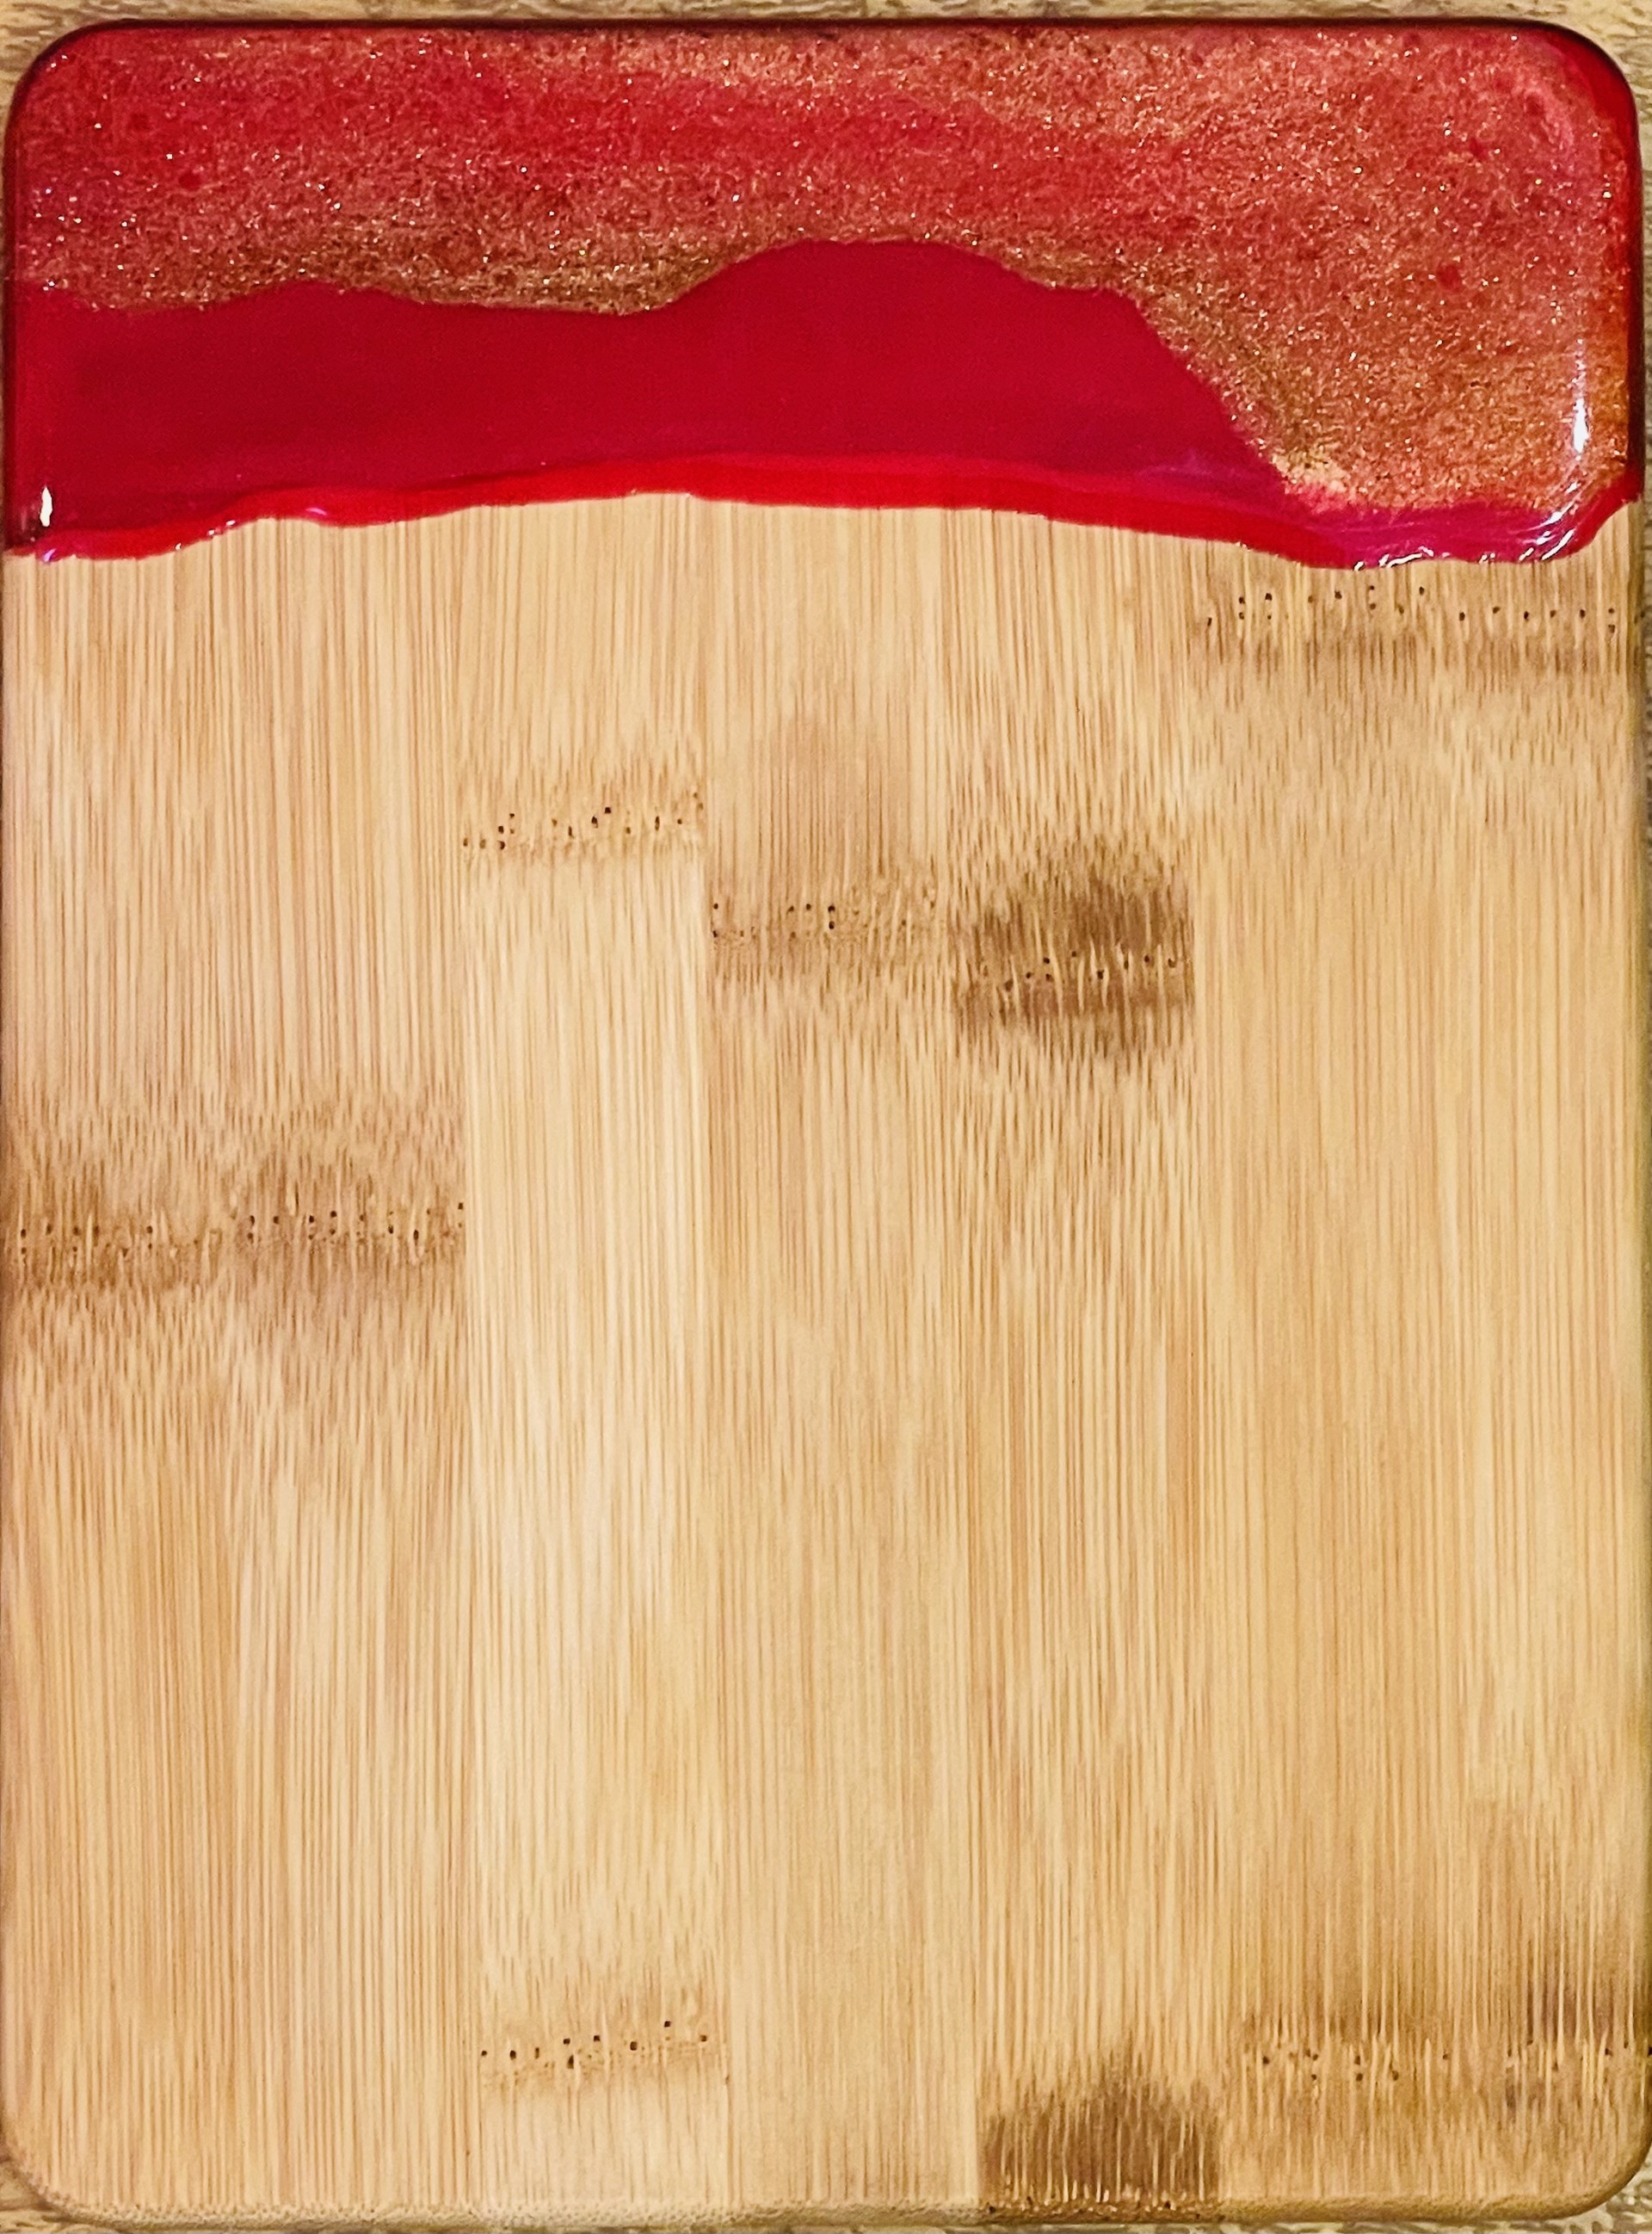 Cutting Boards - Small Assorted Each by Victoria Thornton